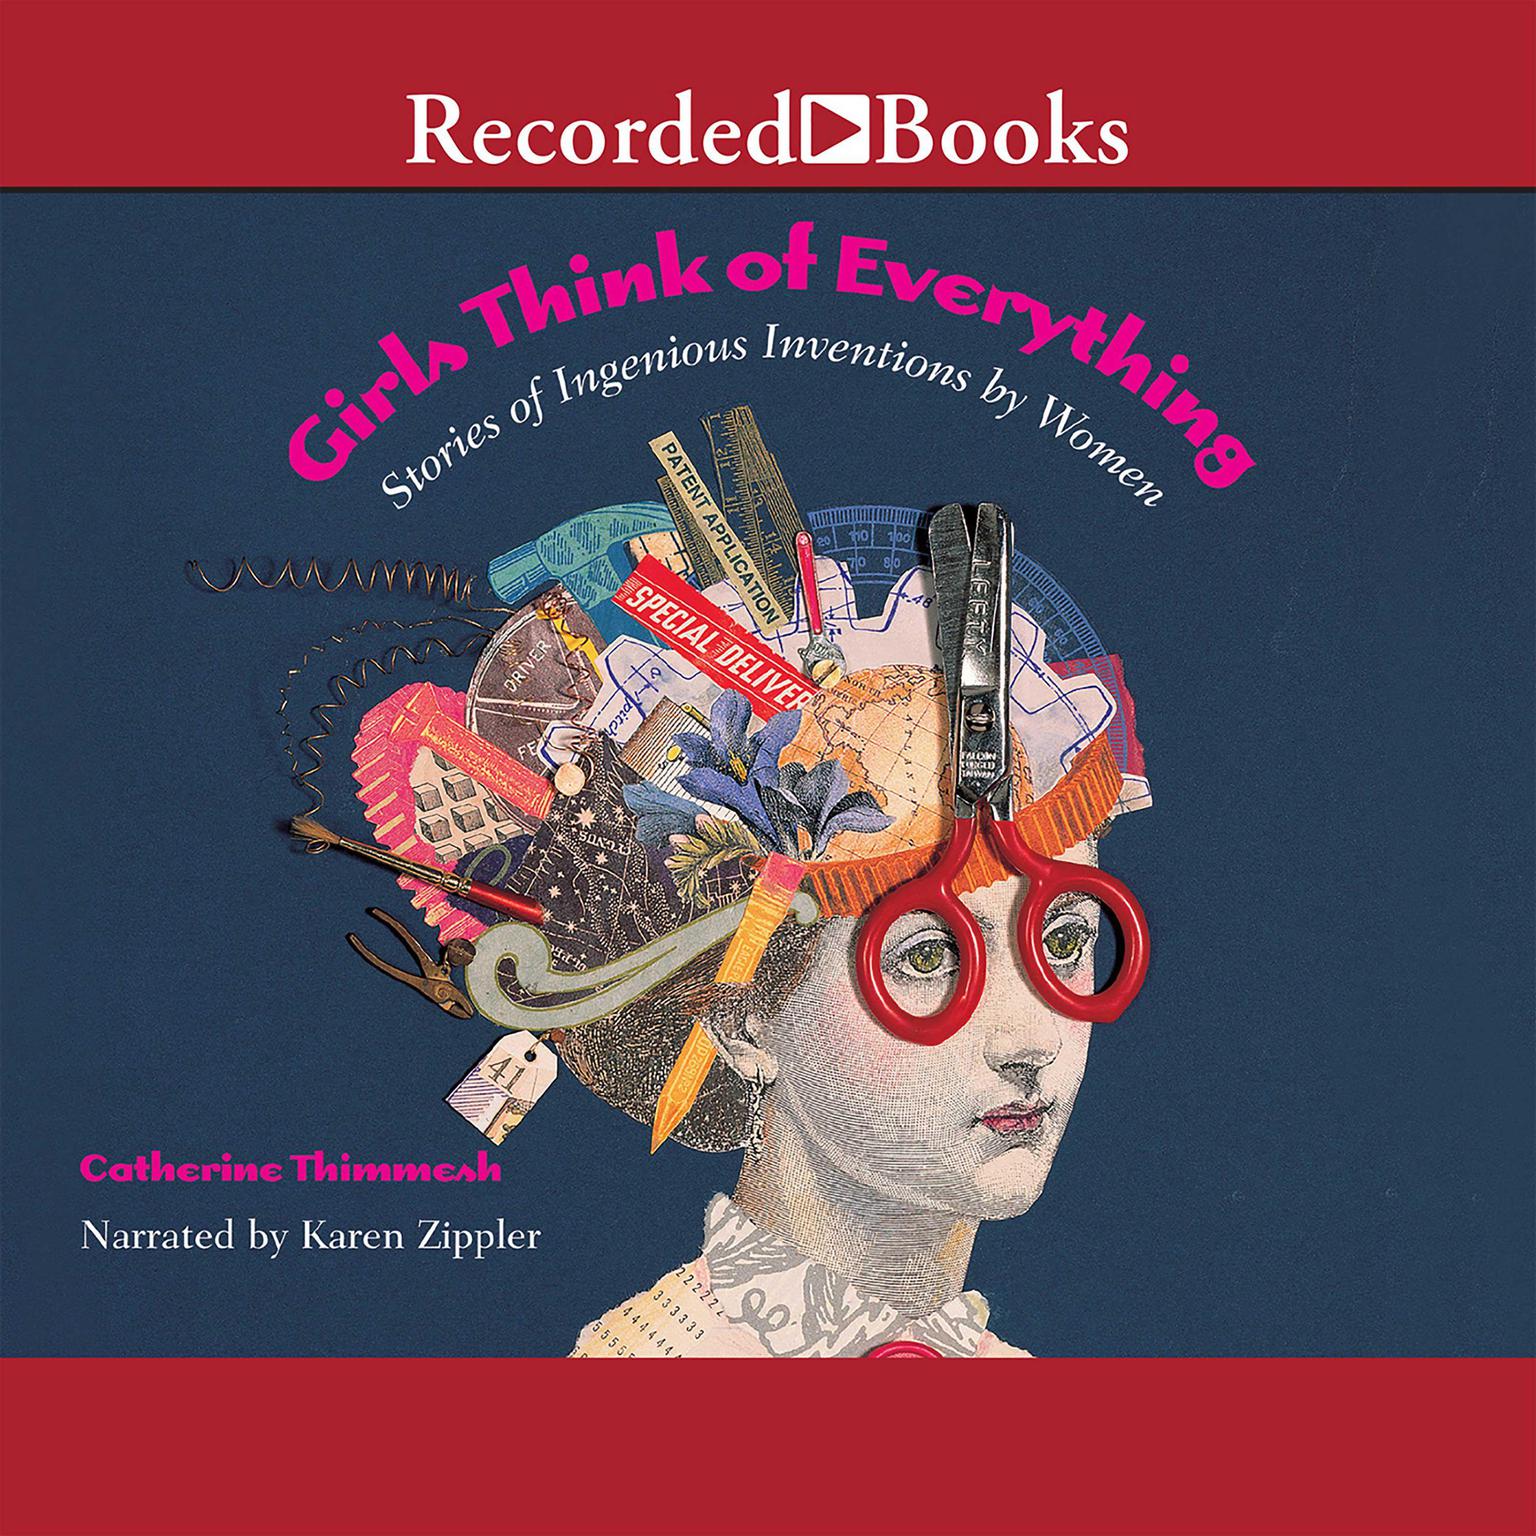 Girls Think of Everything: Stories of Ingenious Inventions by Women Audiobook, by Catherine Thimmesh